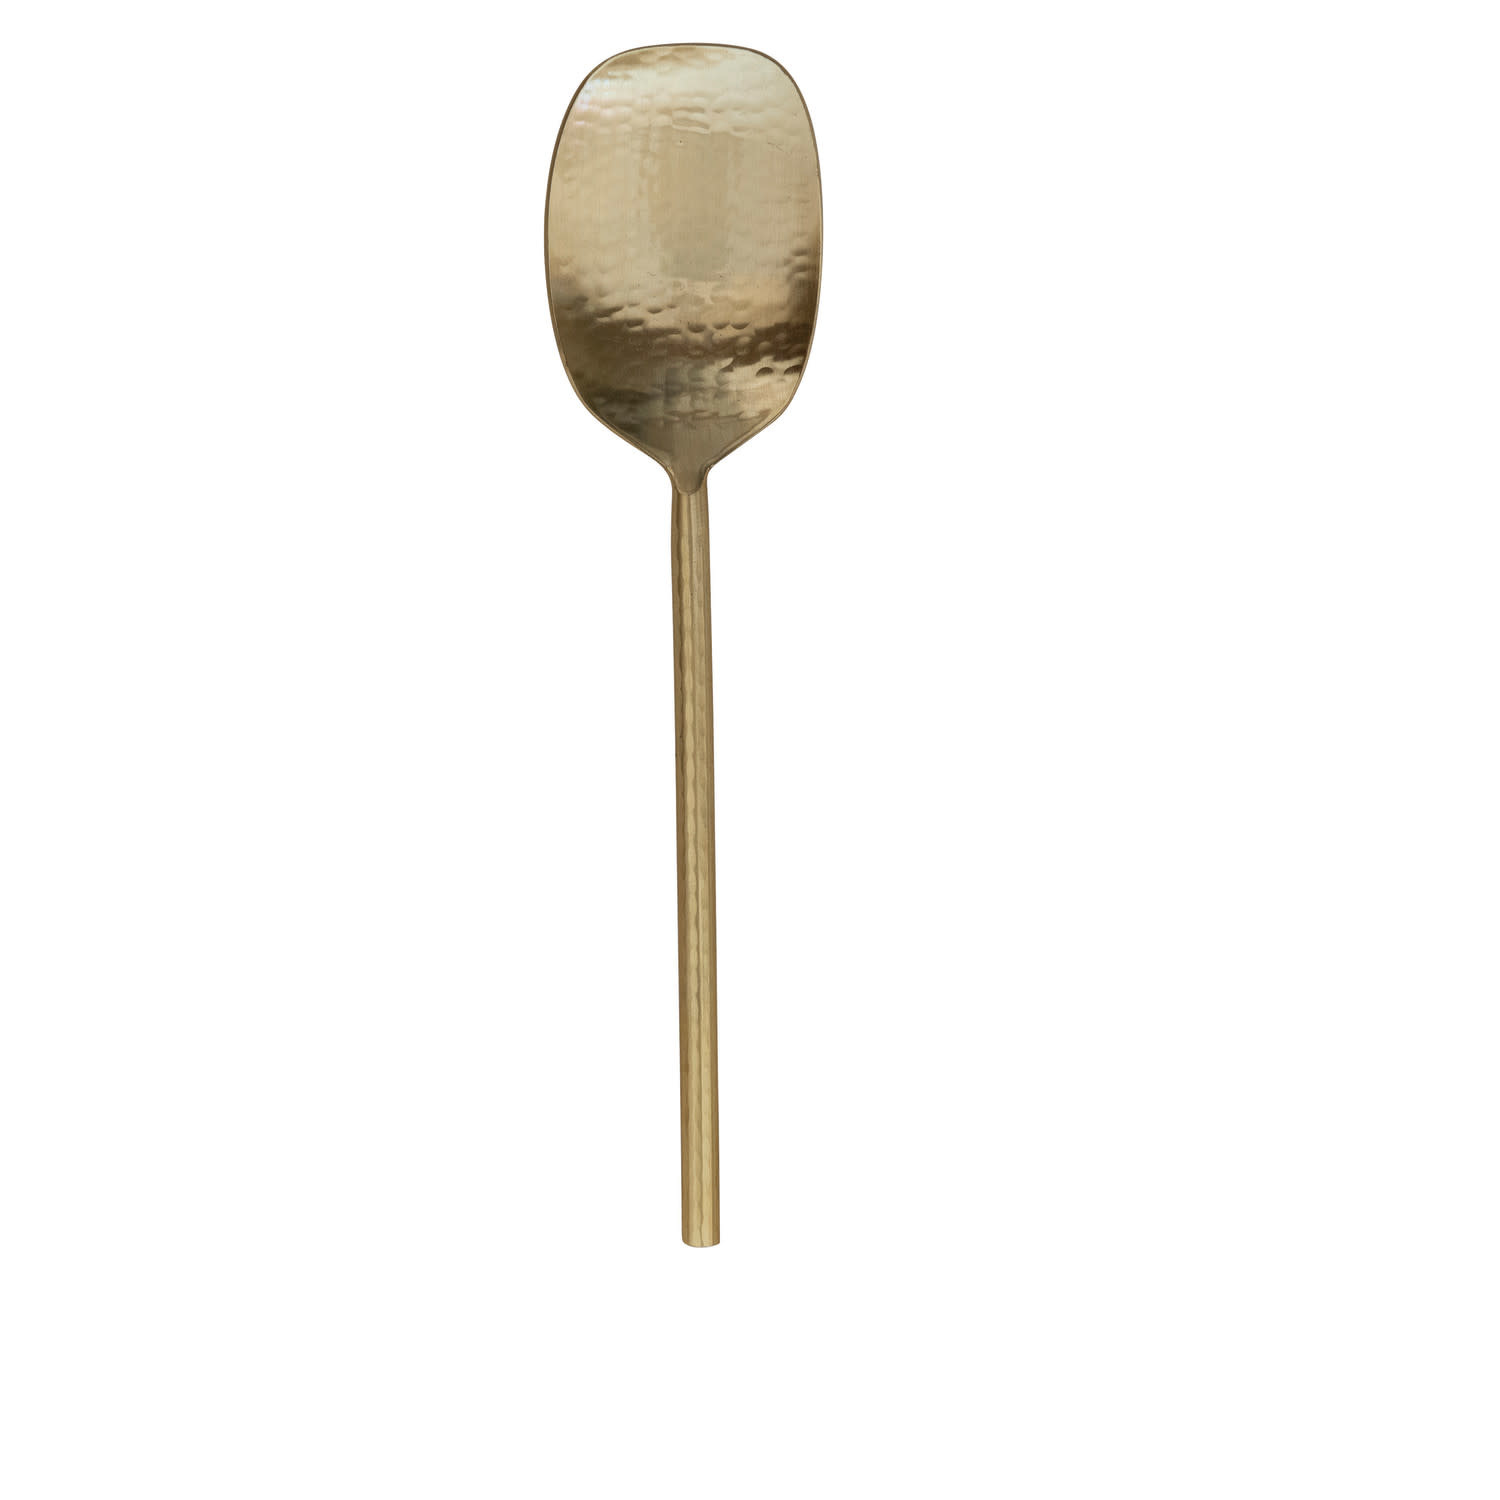 Hammered Stainless Steel Serving Spoon, Gold 9.5